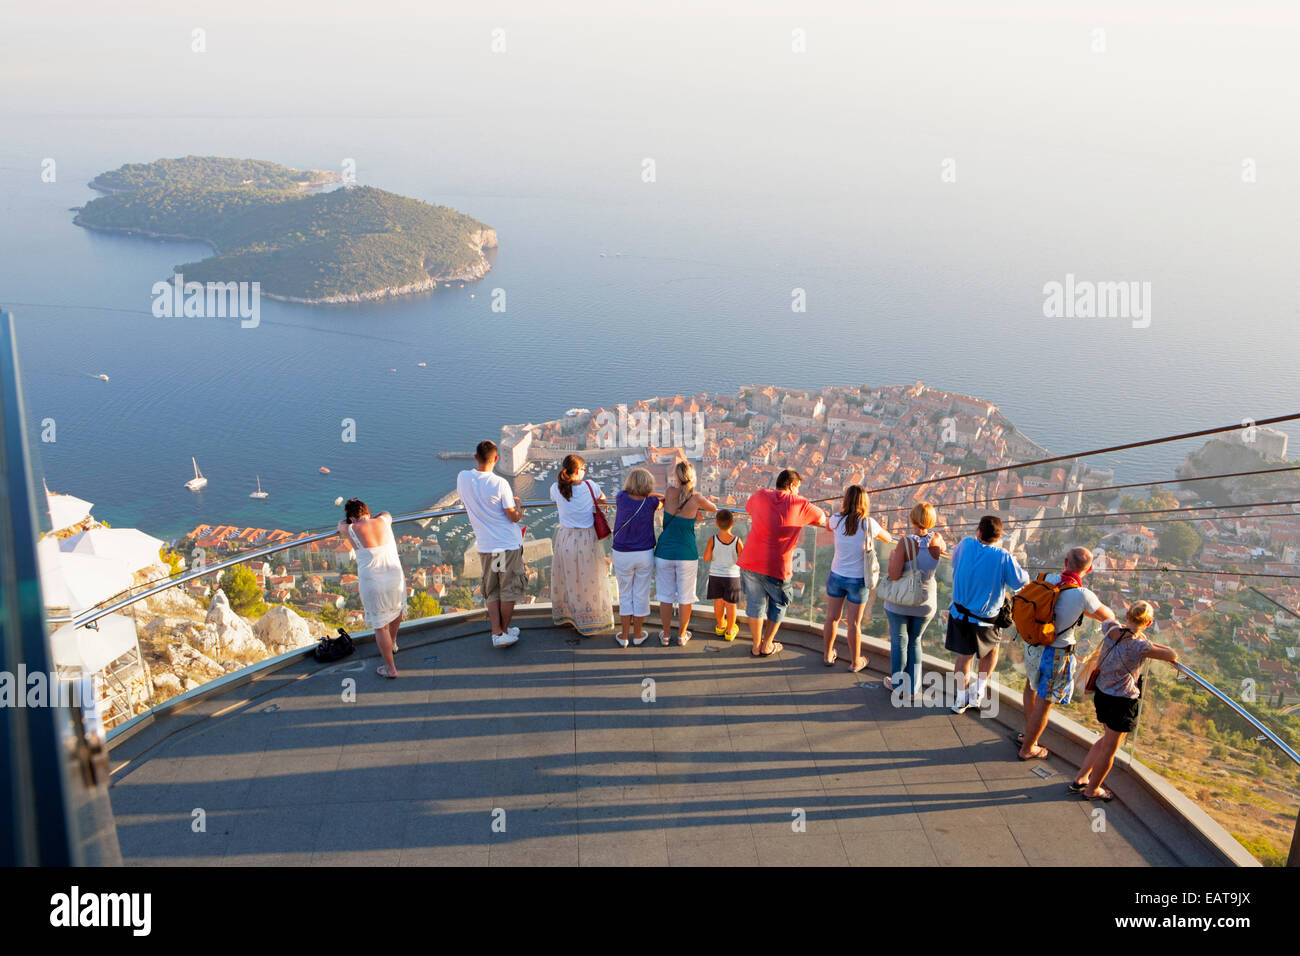 VIEW FROM SRD HILL OF OLD CITY OF DUBROVNIK AND LOKRUM ISLAND Stock Photo